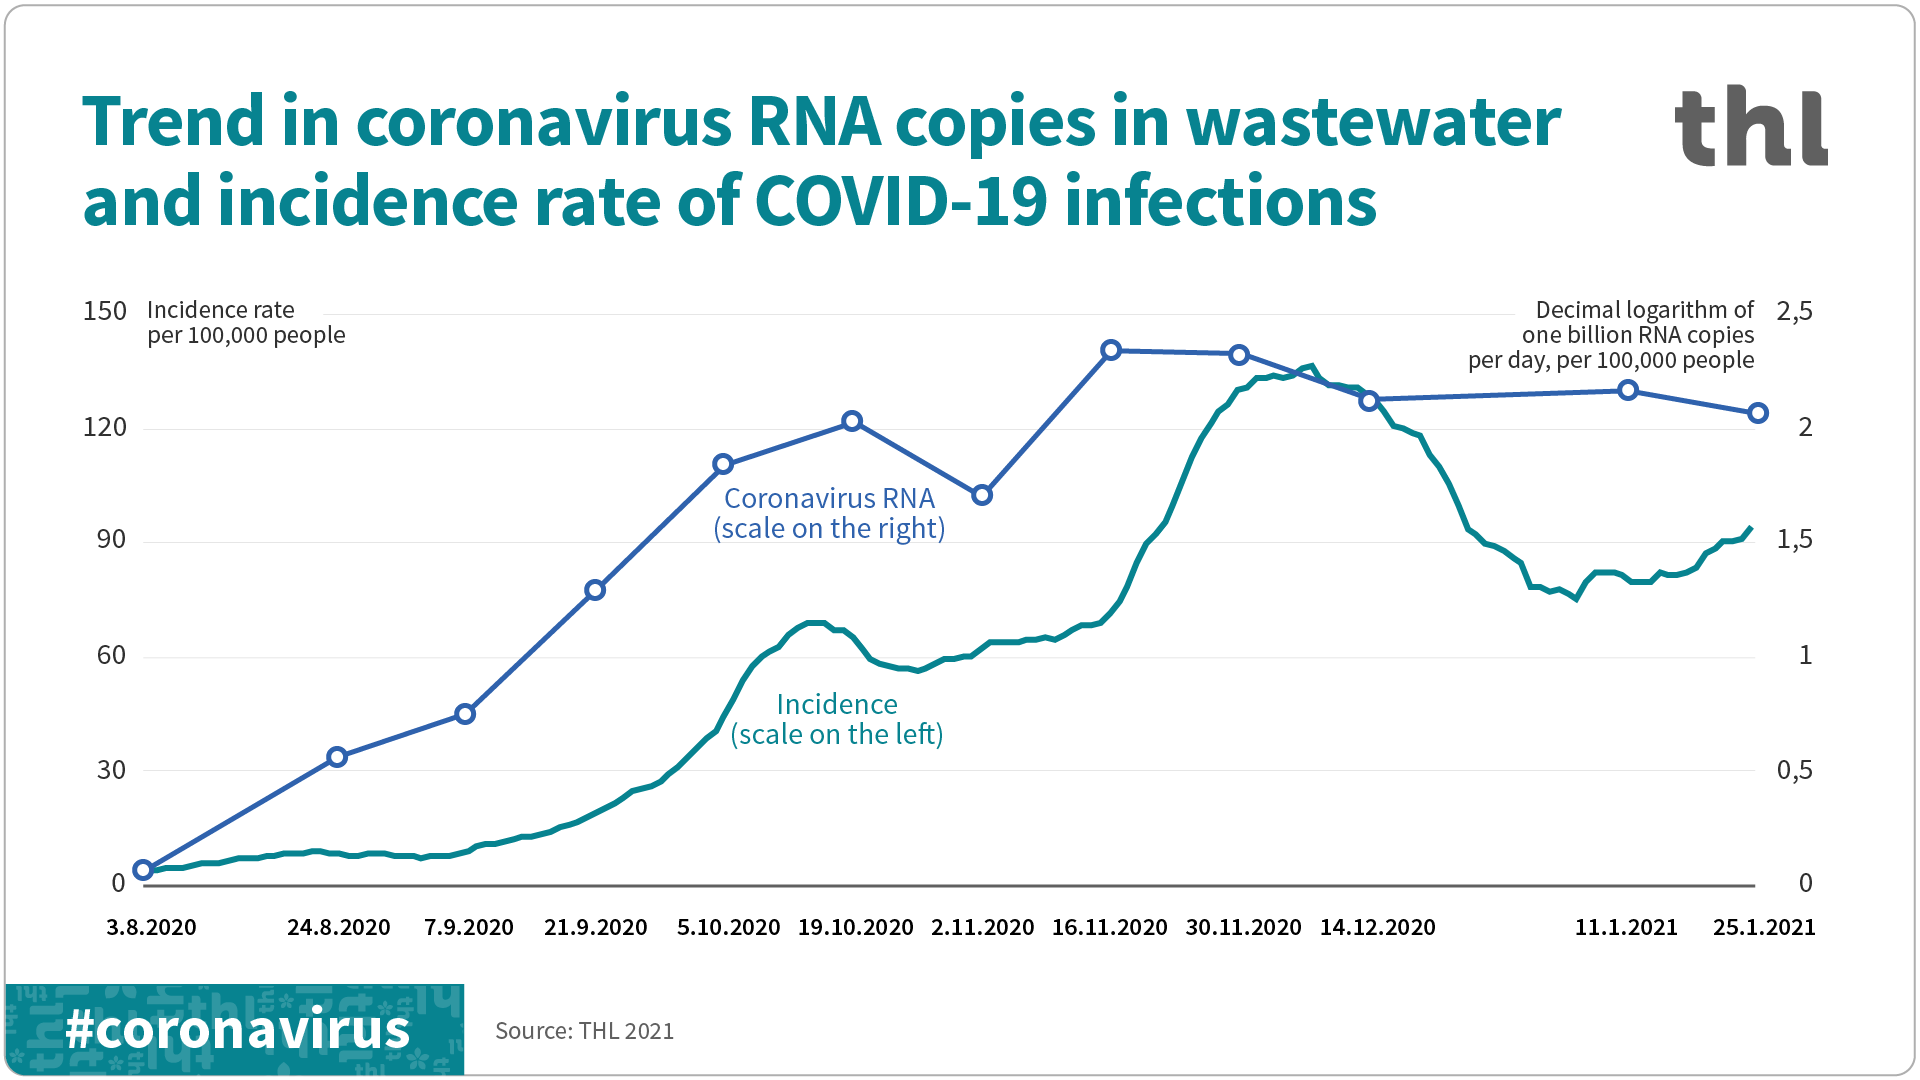 Graphic: The number of coronavirus RNA copies in wastewater follow the trend in COVID-19 incidence